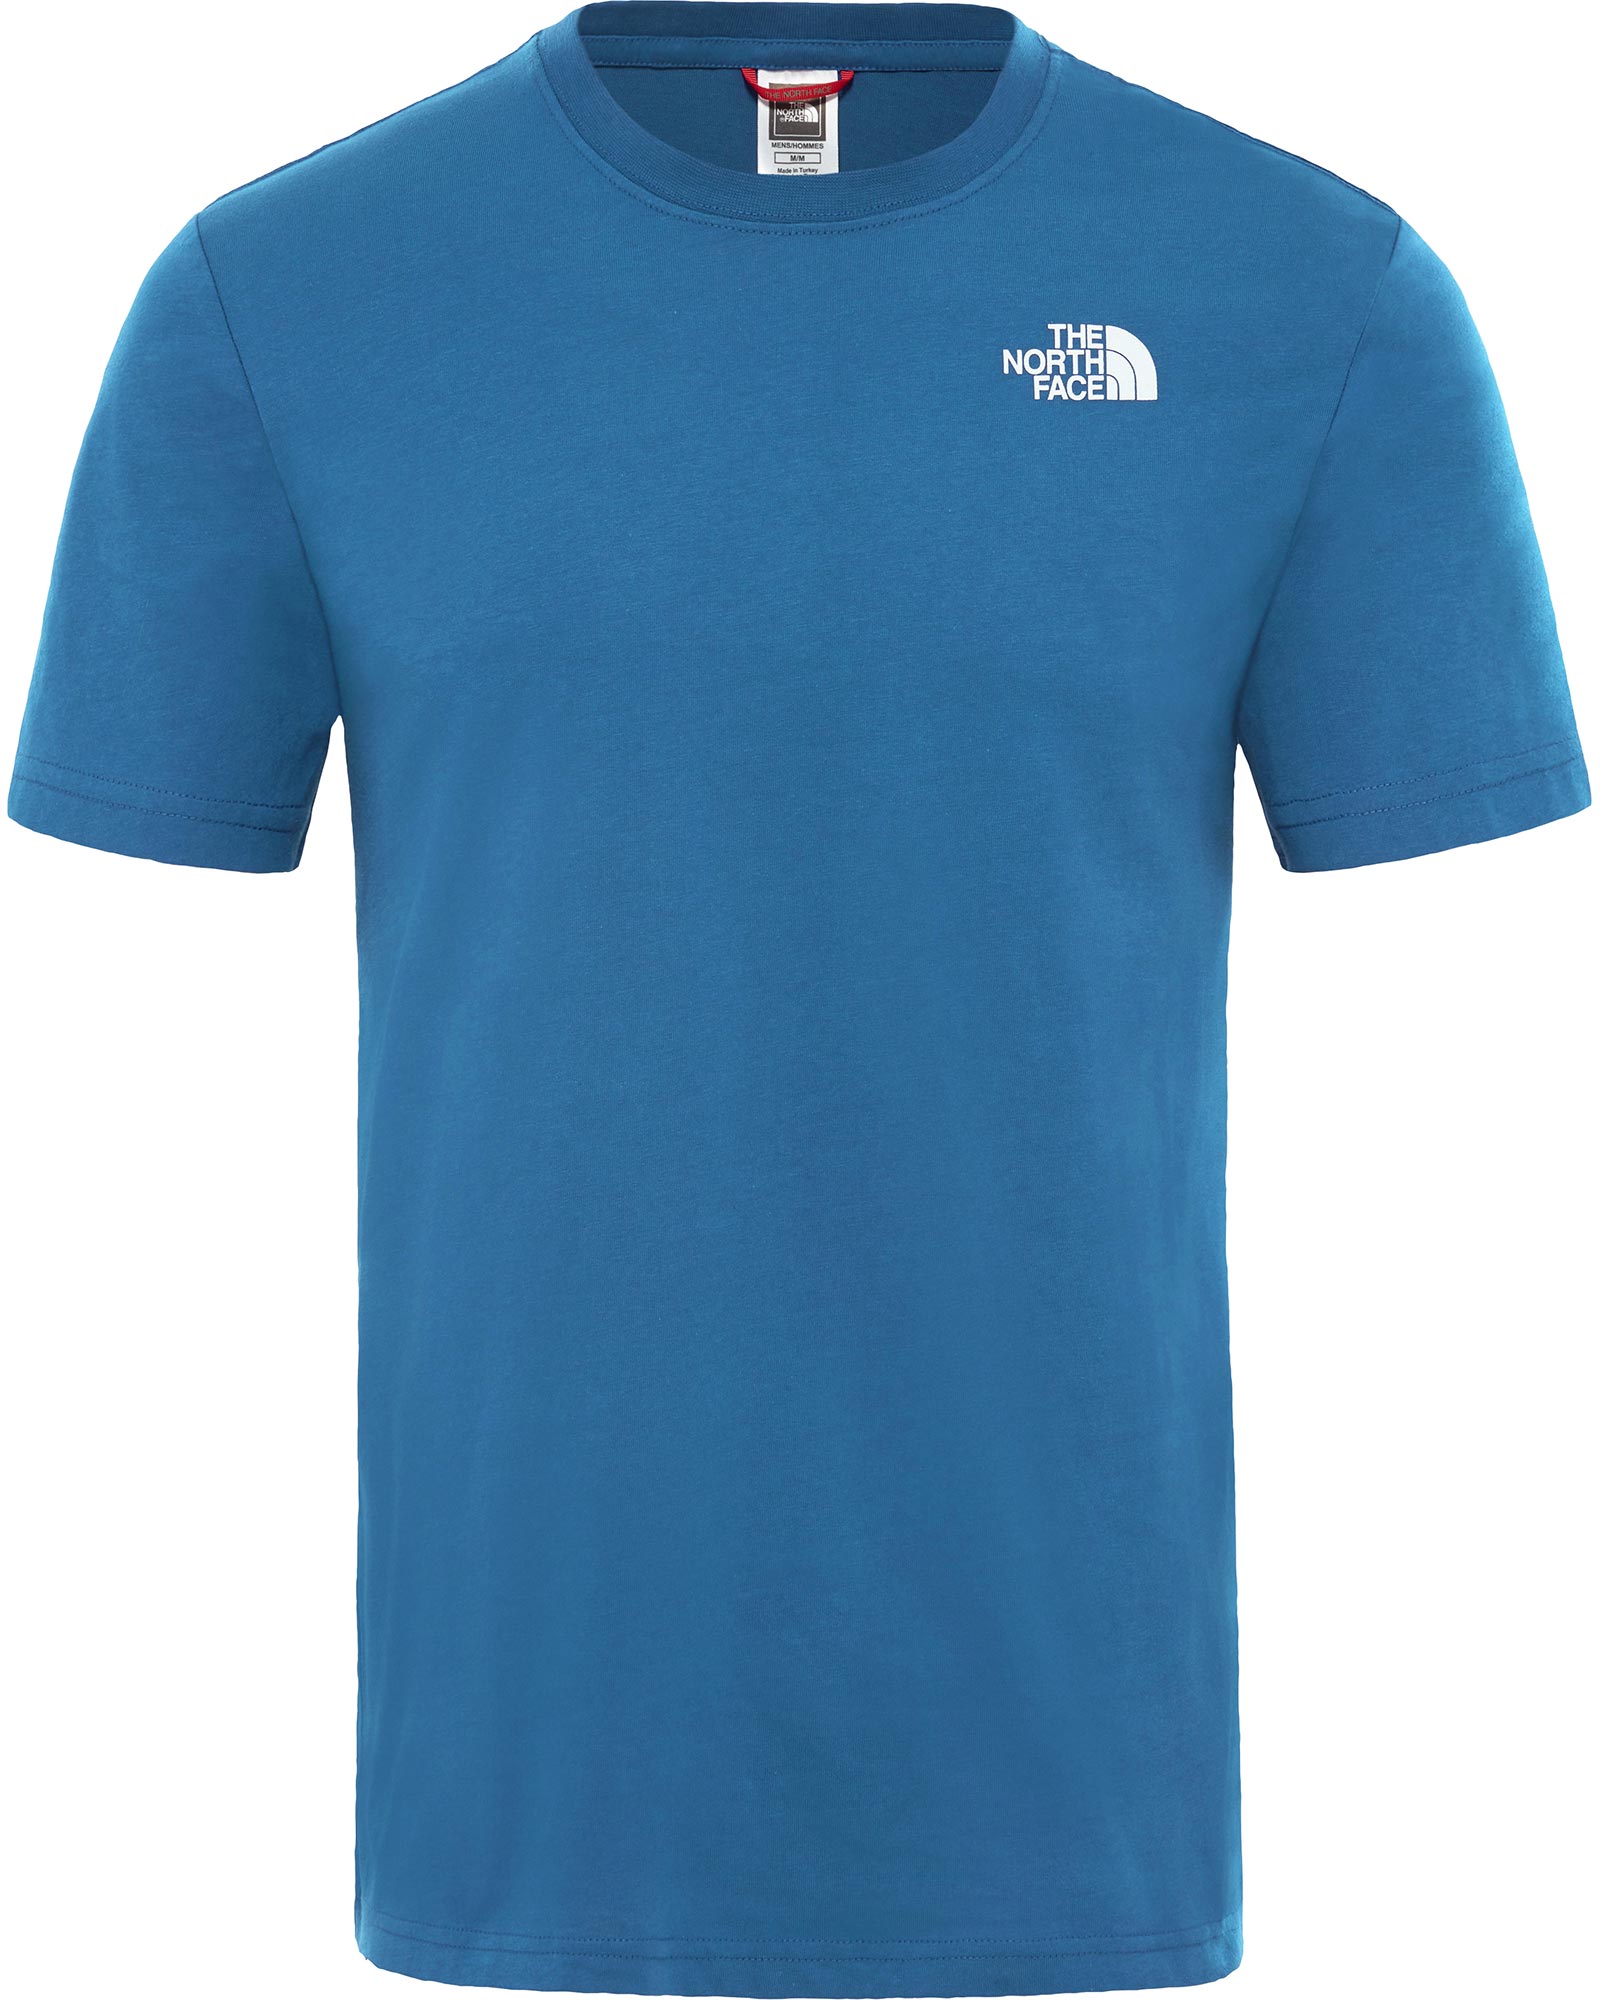 The North Face Red Box Men’s T Shirt - Banff Blue S